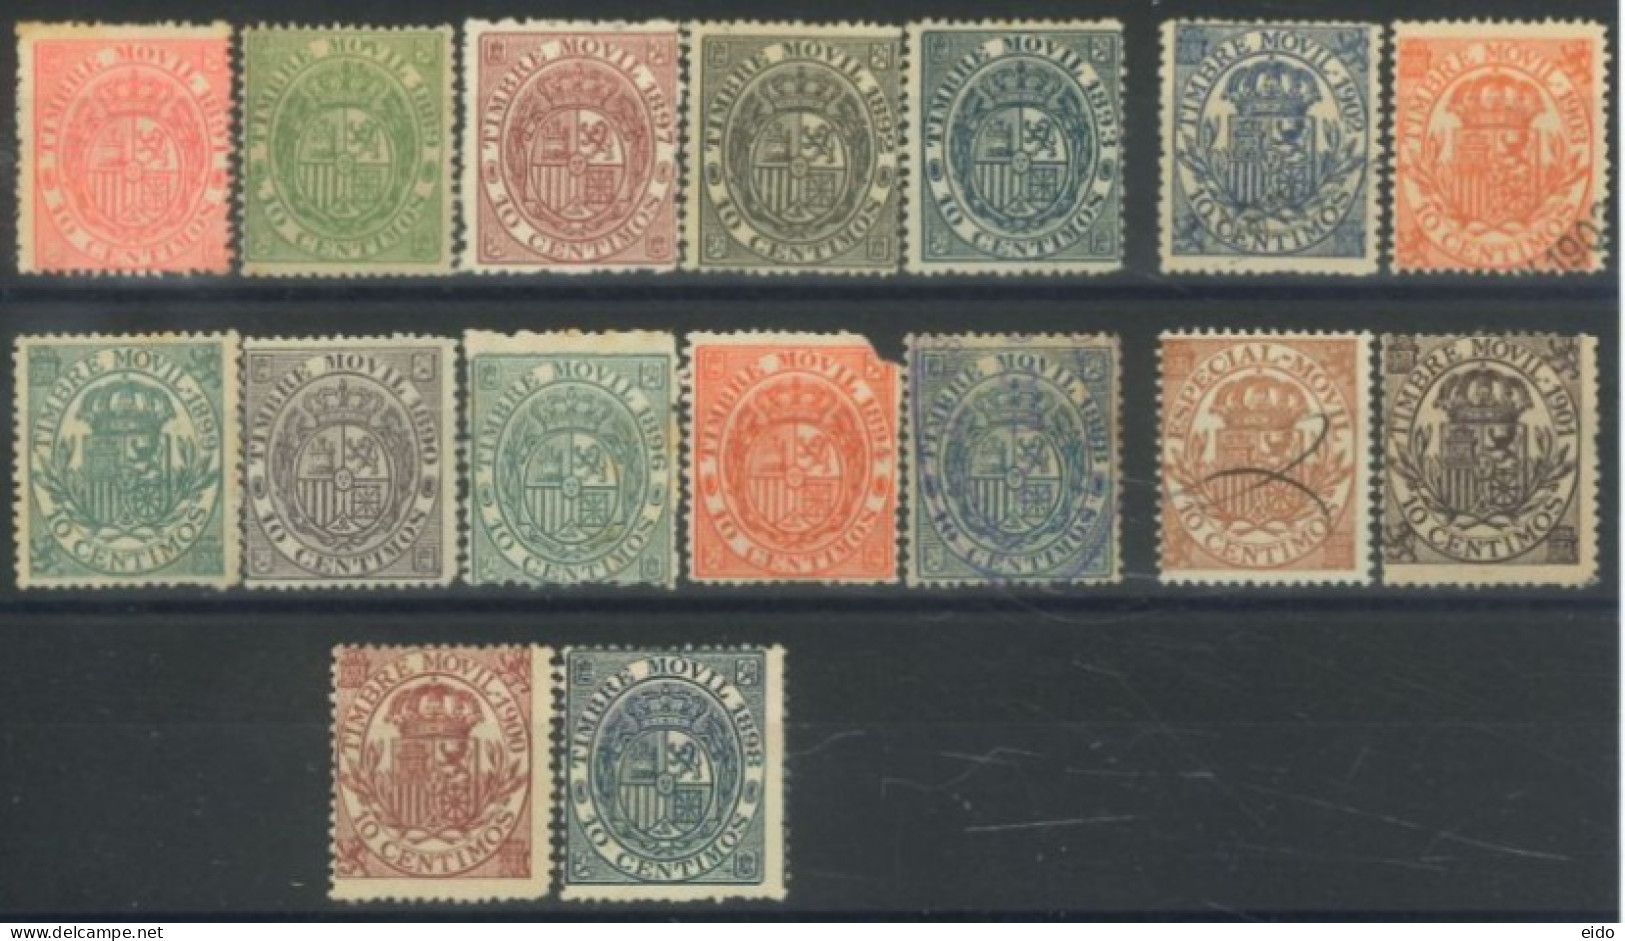 SPAIN, 1888/1903, REVENUE ADHESIVE STAMPS SET OF 16, MOSTLY MINT NO GUM (MNG), ONLY 3 STAMPS USED. - Neufs